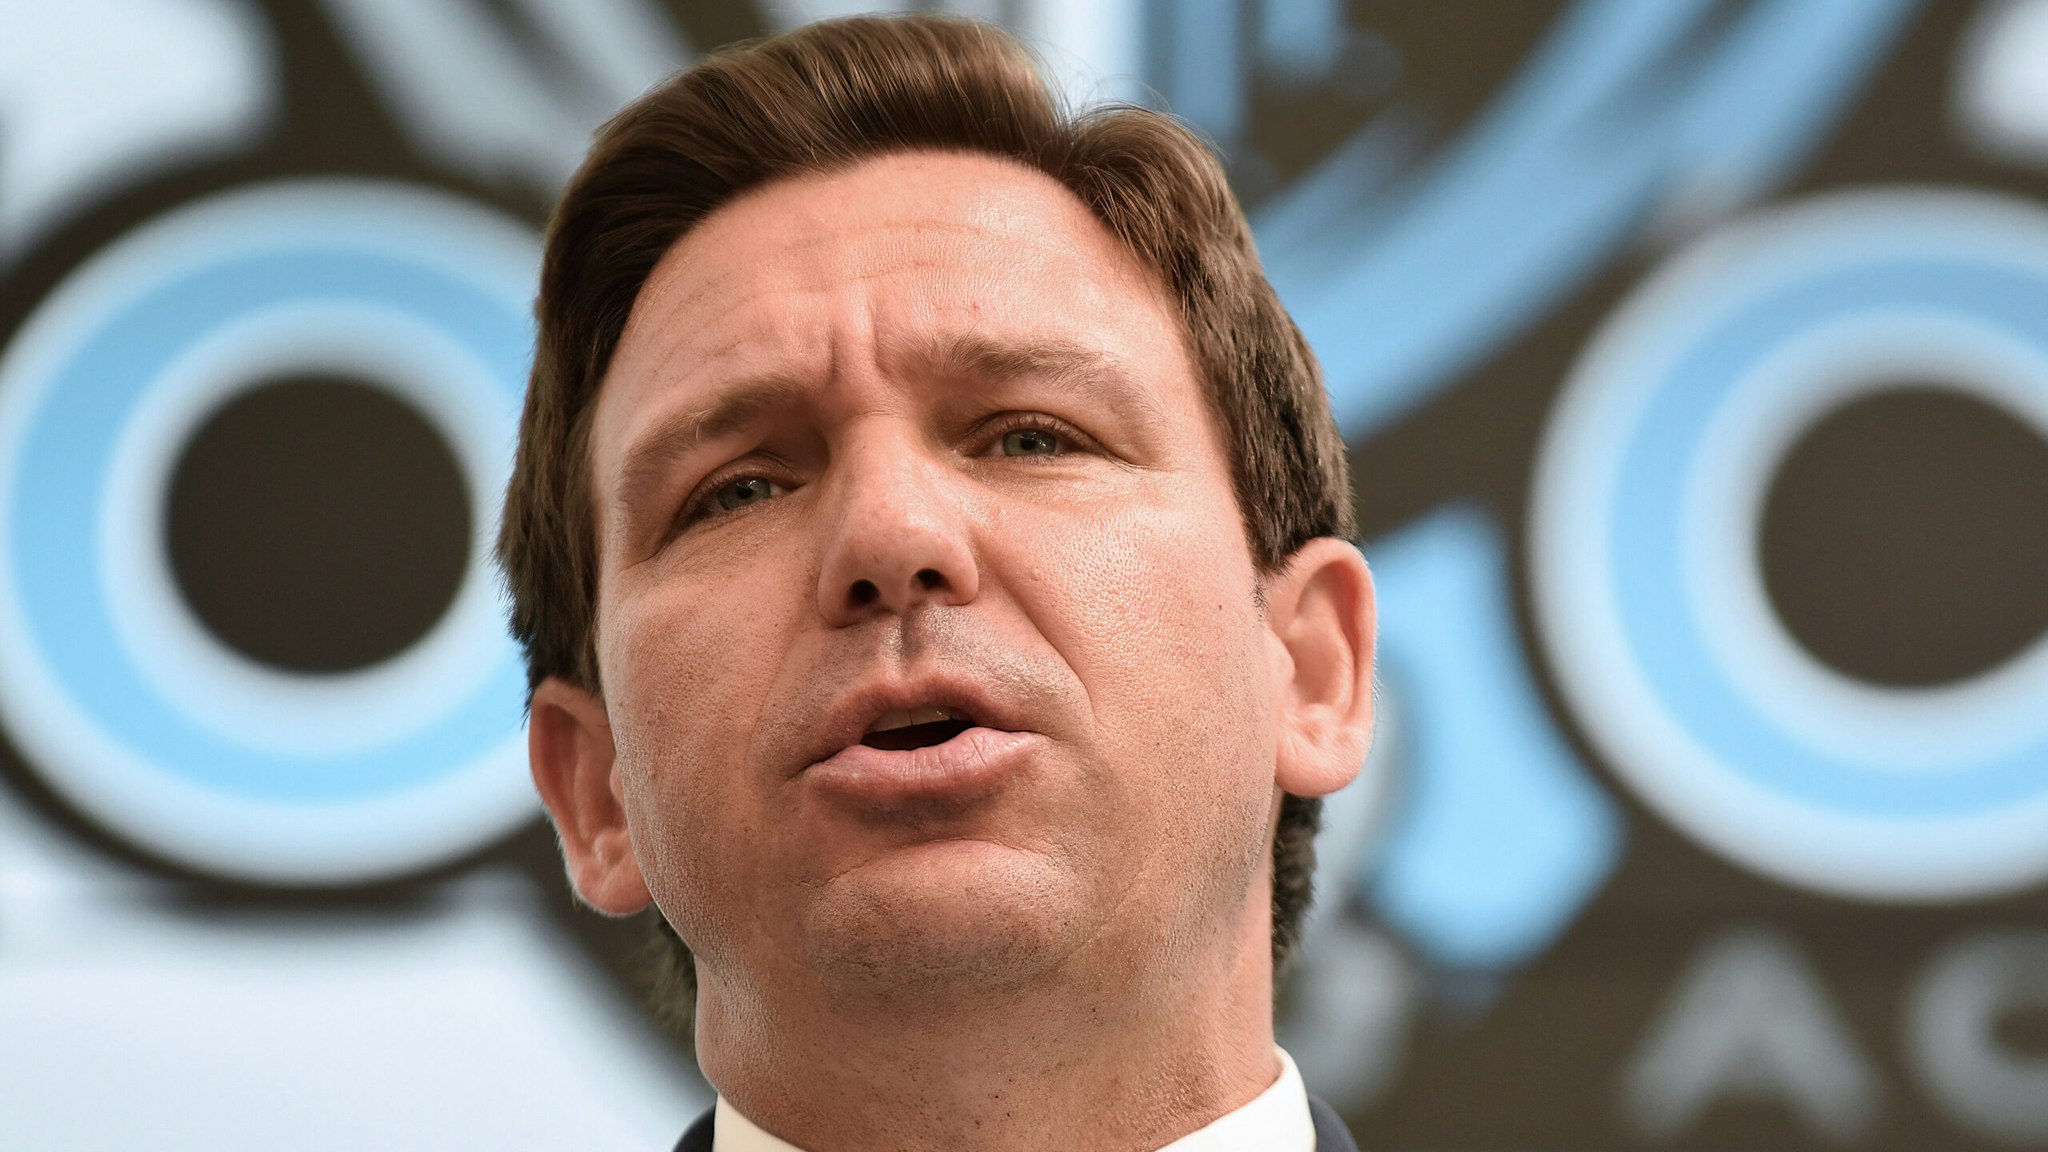 KISSIMMEE, FLORIDA, UNITED STATES - 2021/09/22: Florida Gov. Ron DeSantis speaks during a press conference before newly appointed state Surgeon General Dr. Joseph Ladapo at Neo City Academy in Kissimmee, Florida. A day after being appointed, Ladapo instituted his first rule giving parents "sole discretion" over whether their child wears a mask at school, and also allowing students who come in contact with the coronavirus to continue attending class if they remain asymptomatic.